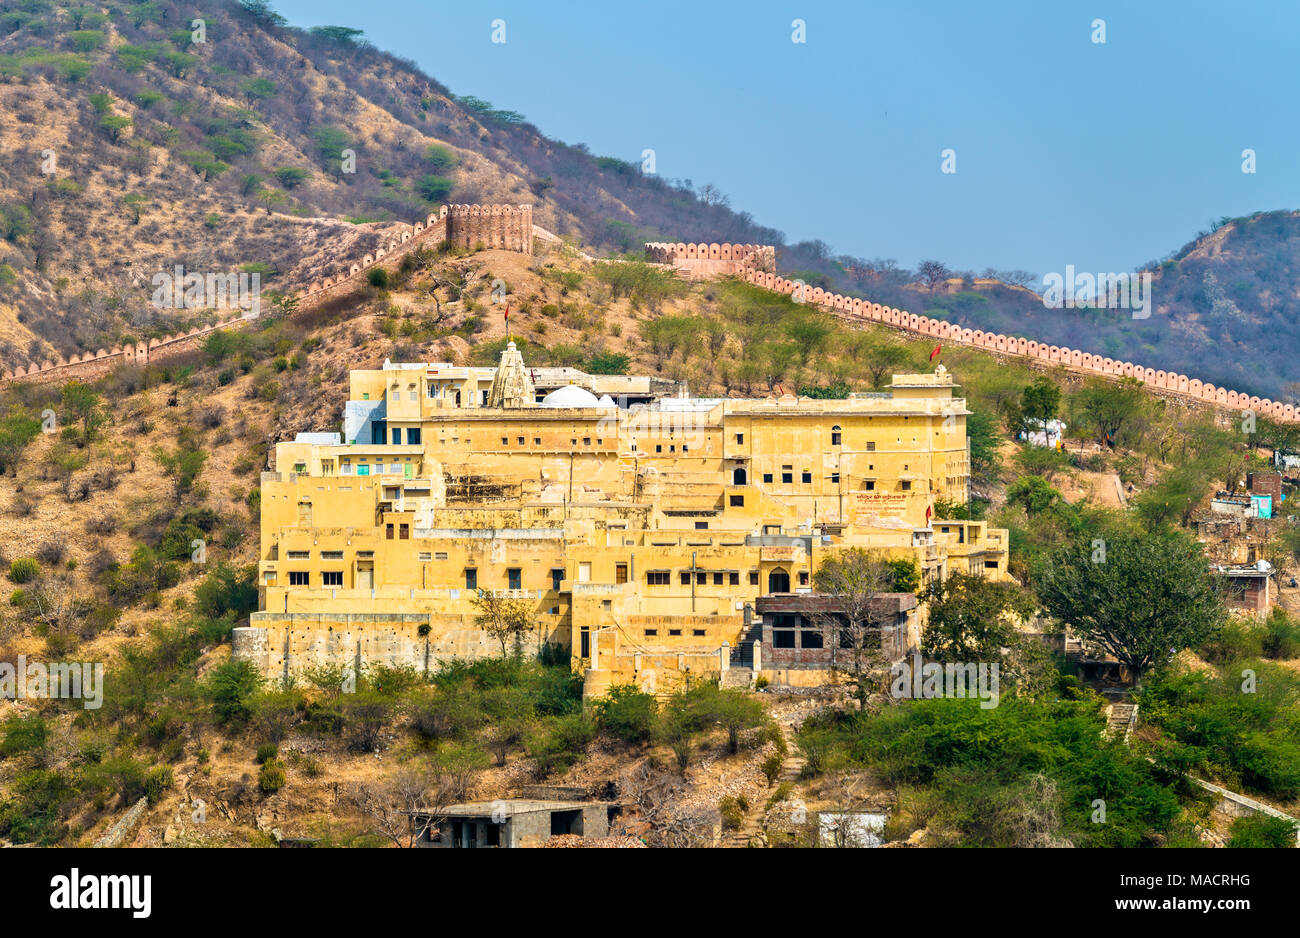 View of Badrinath Temple in Amer near Jaipur, India Stock Photo